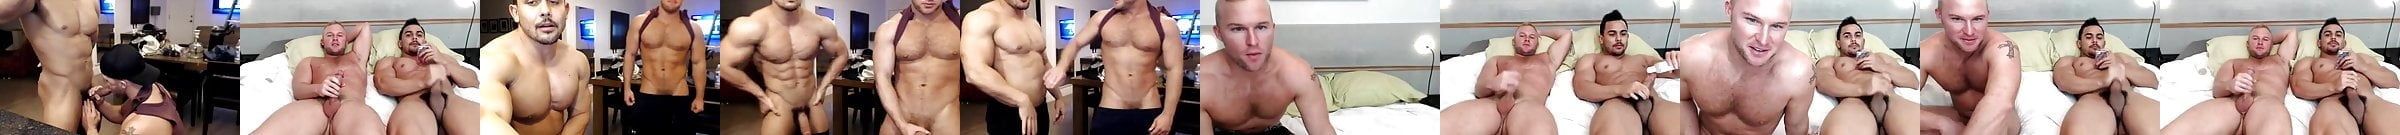 Straight Muscle Guy On Webcam Gay Muscles Porn Cd Xhamster